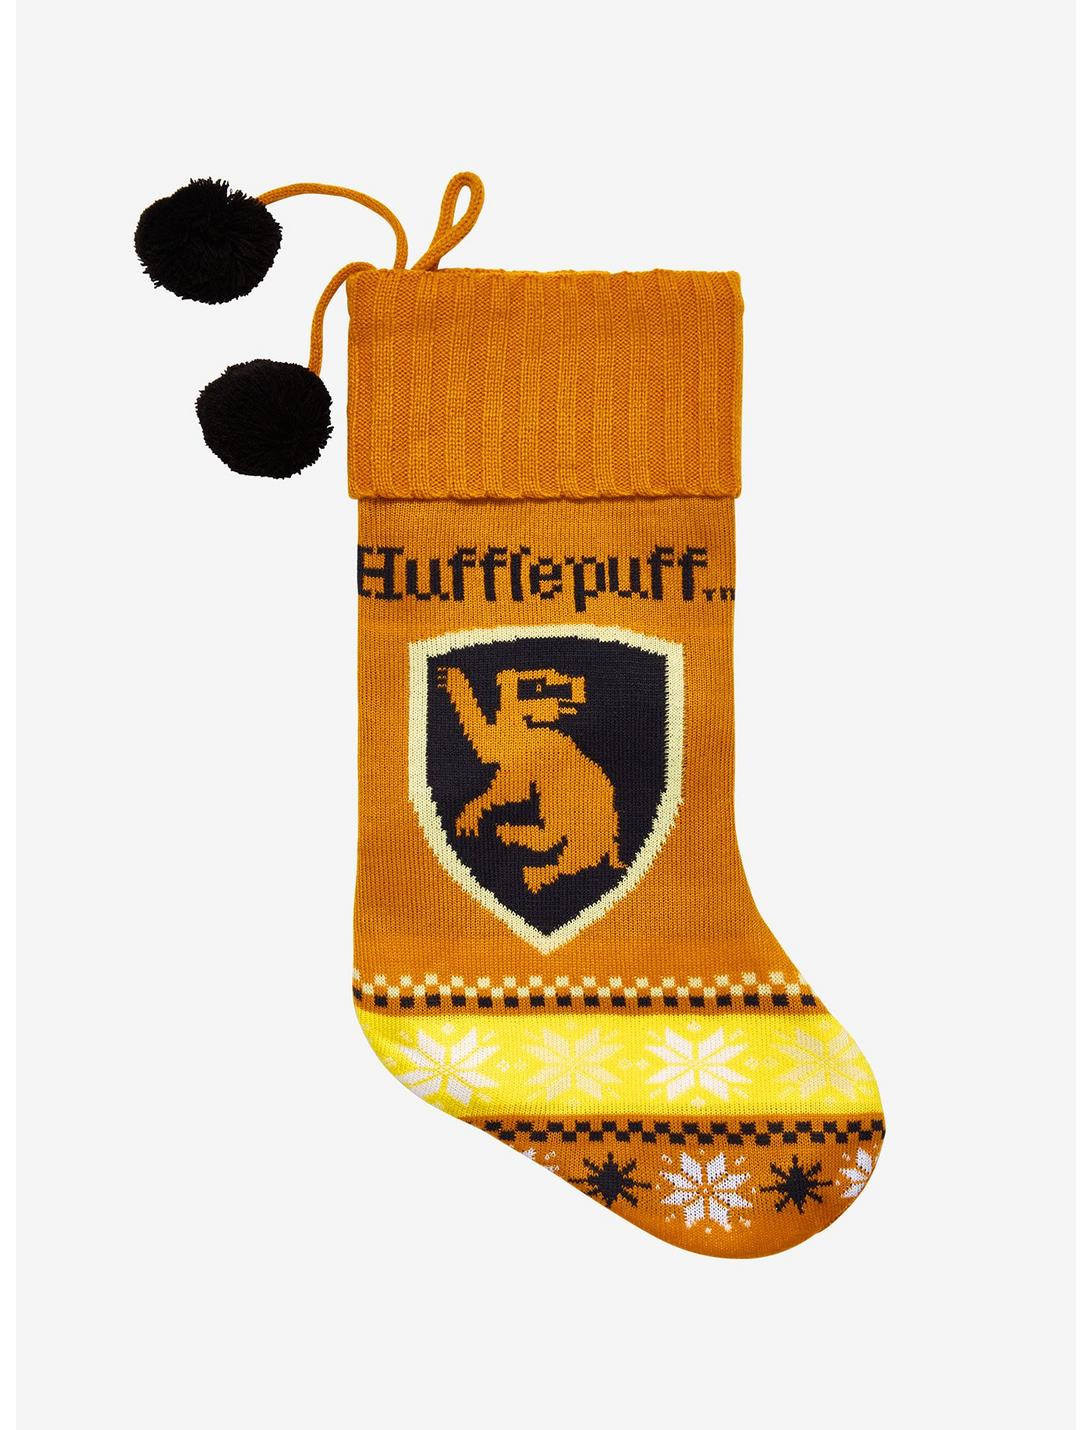 Harry Potter Hufflepuff Knit Stocking Hot Topic Exclusive, , hi-res